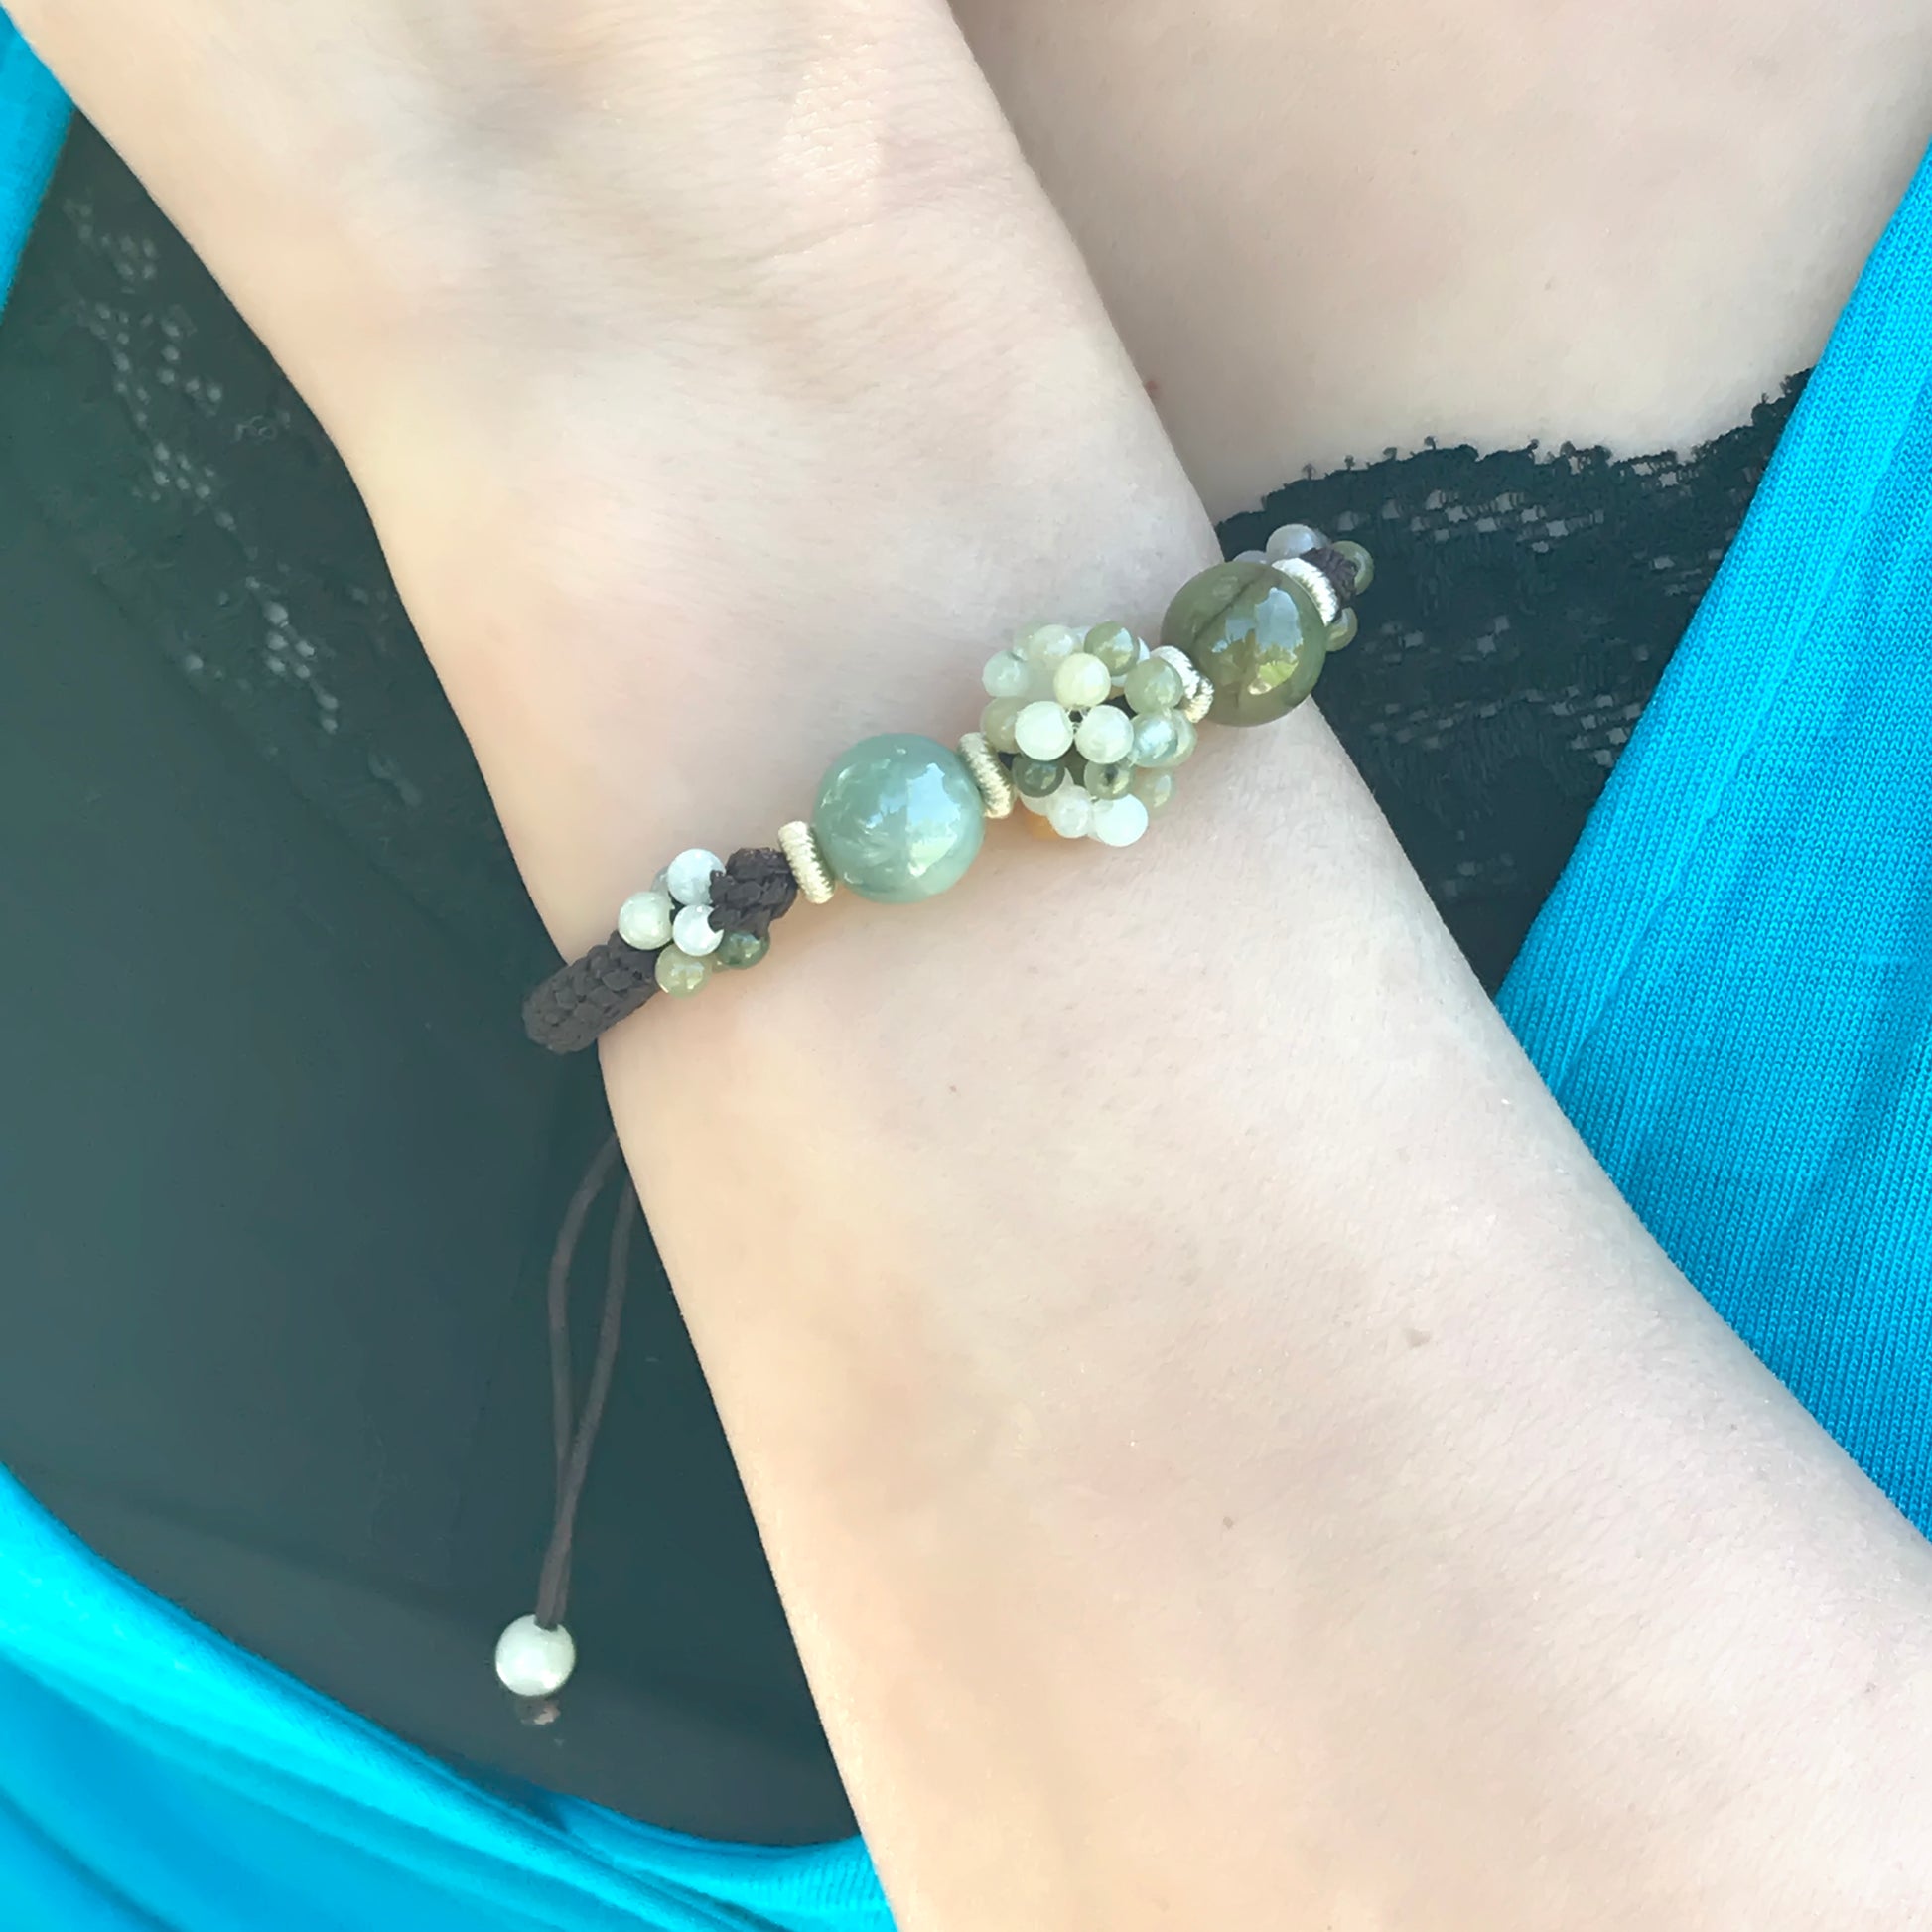 Beaded Charm Jade Bracelet: A Perfect Accessory for Any Outfit